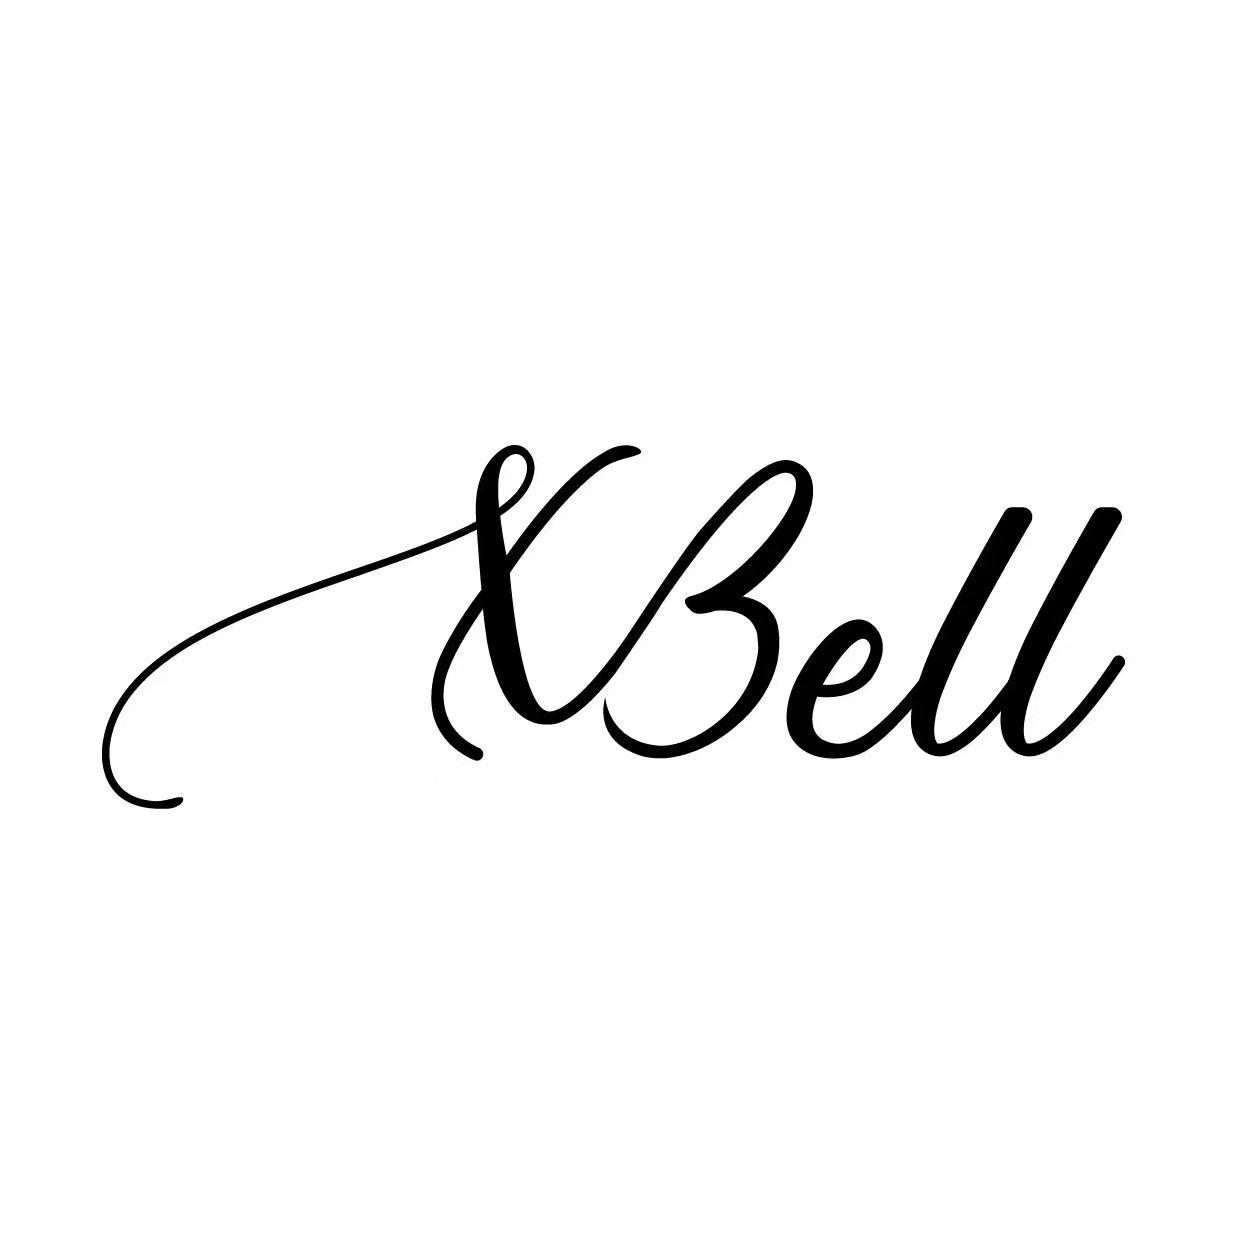 XBELL